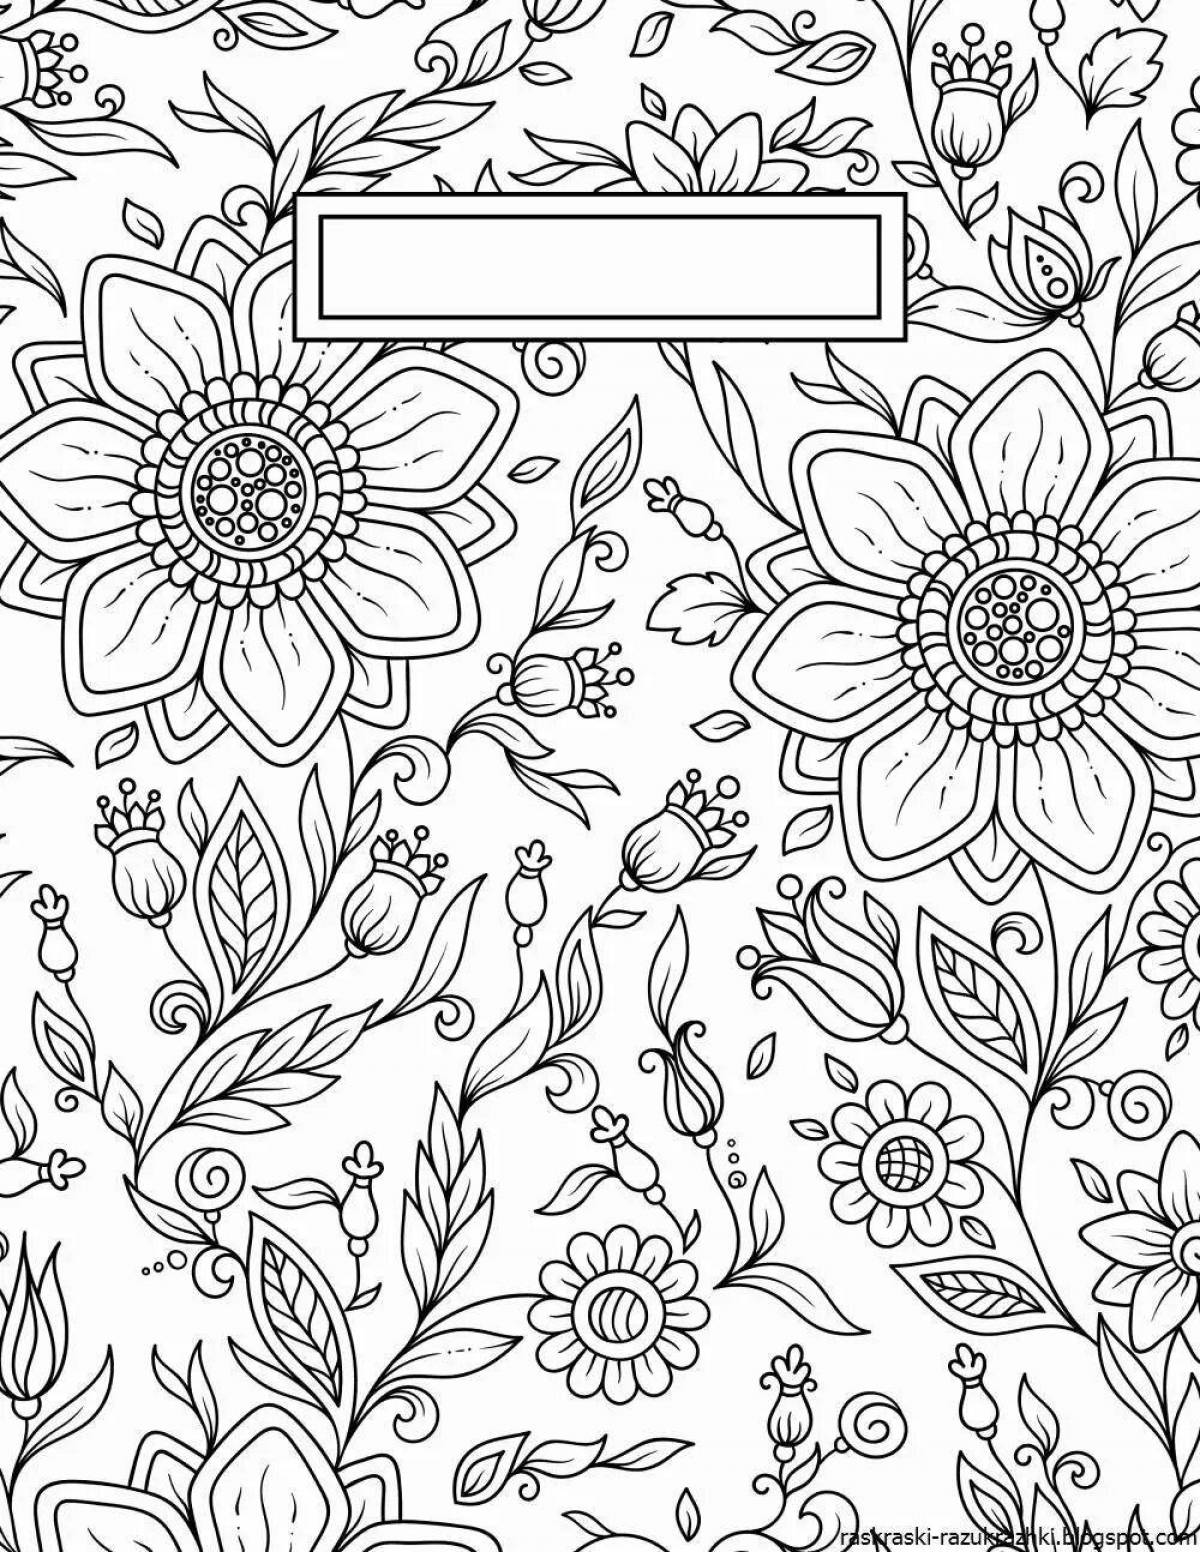 Coloring diary colorful-imagination